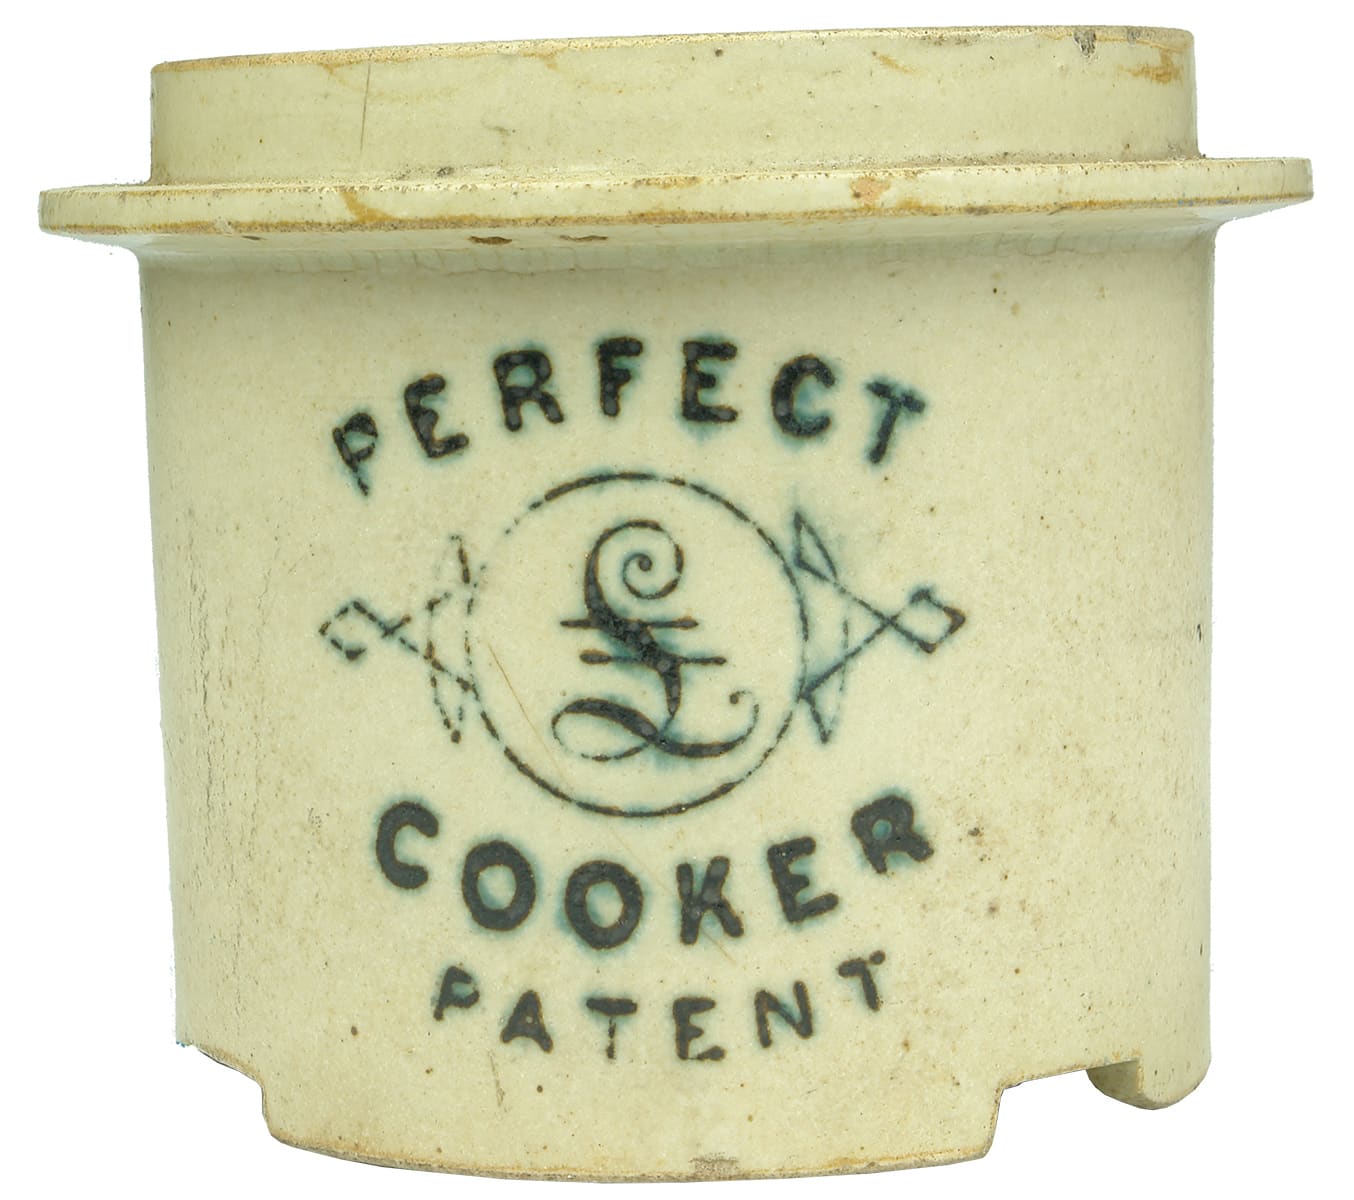 Perfect Cooker Patent